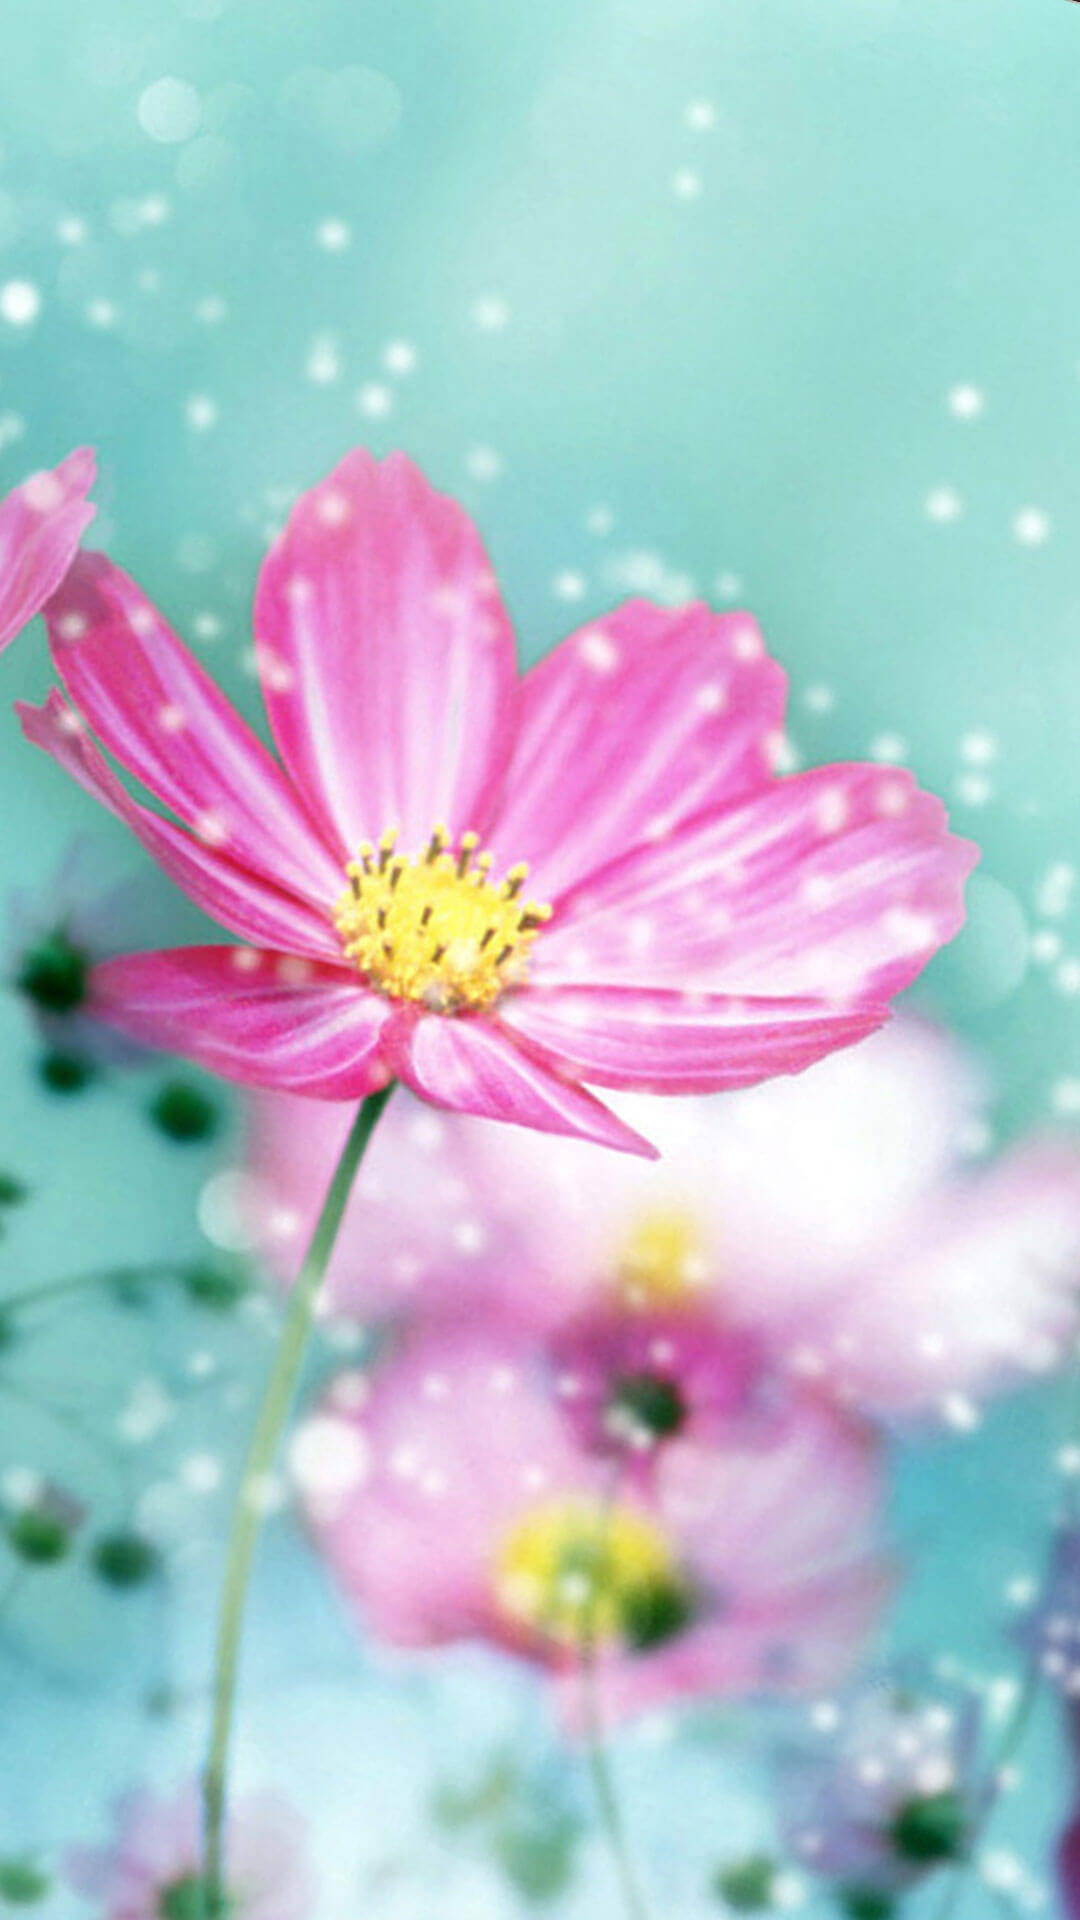 Download Dreamy Spring Flower iPhone Wallpaper